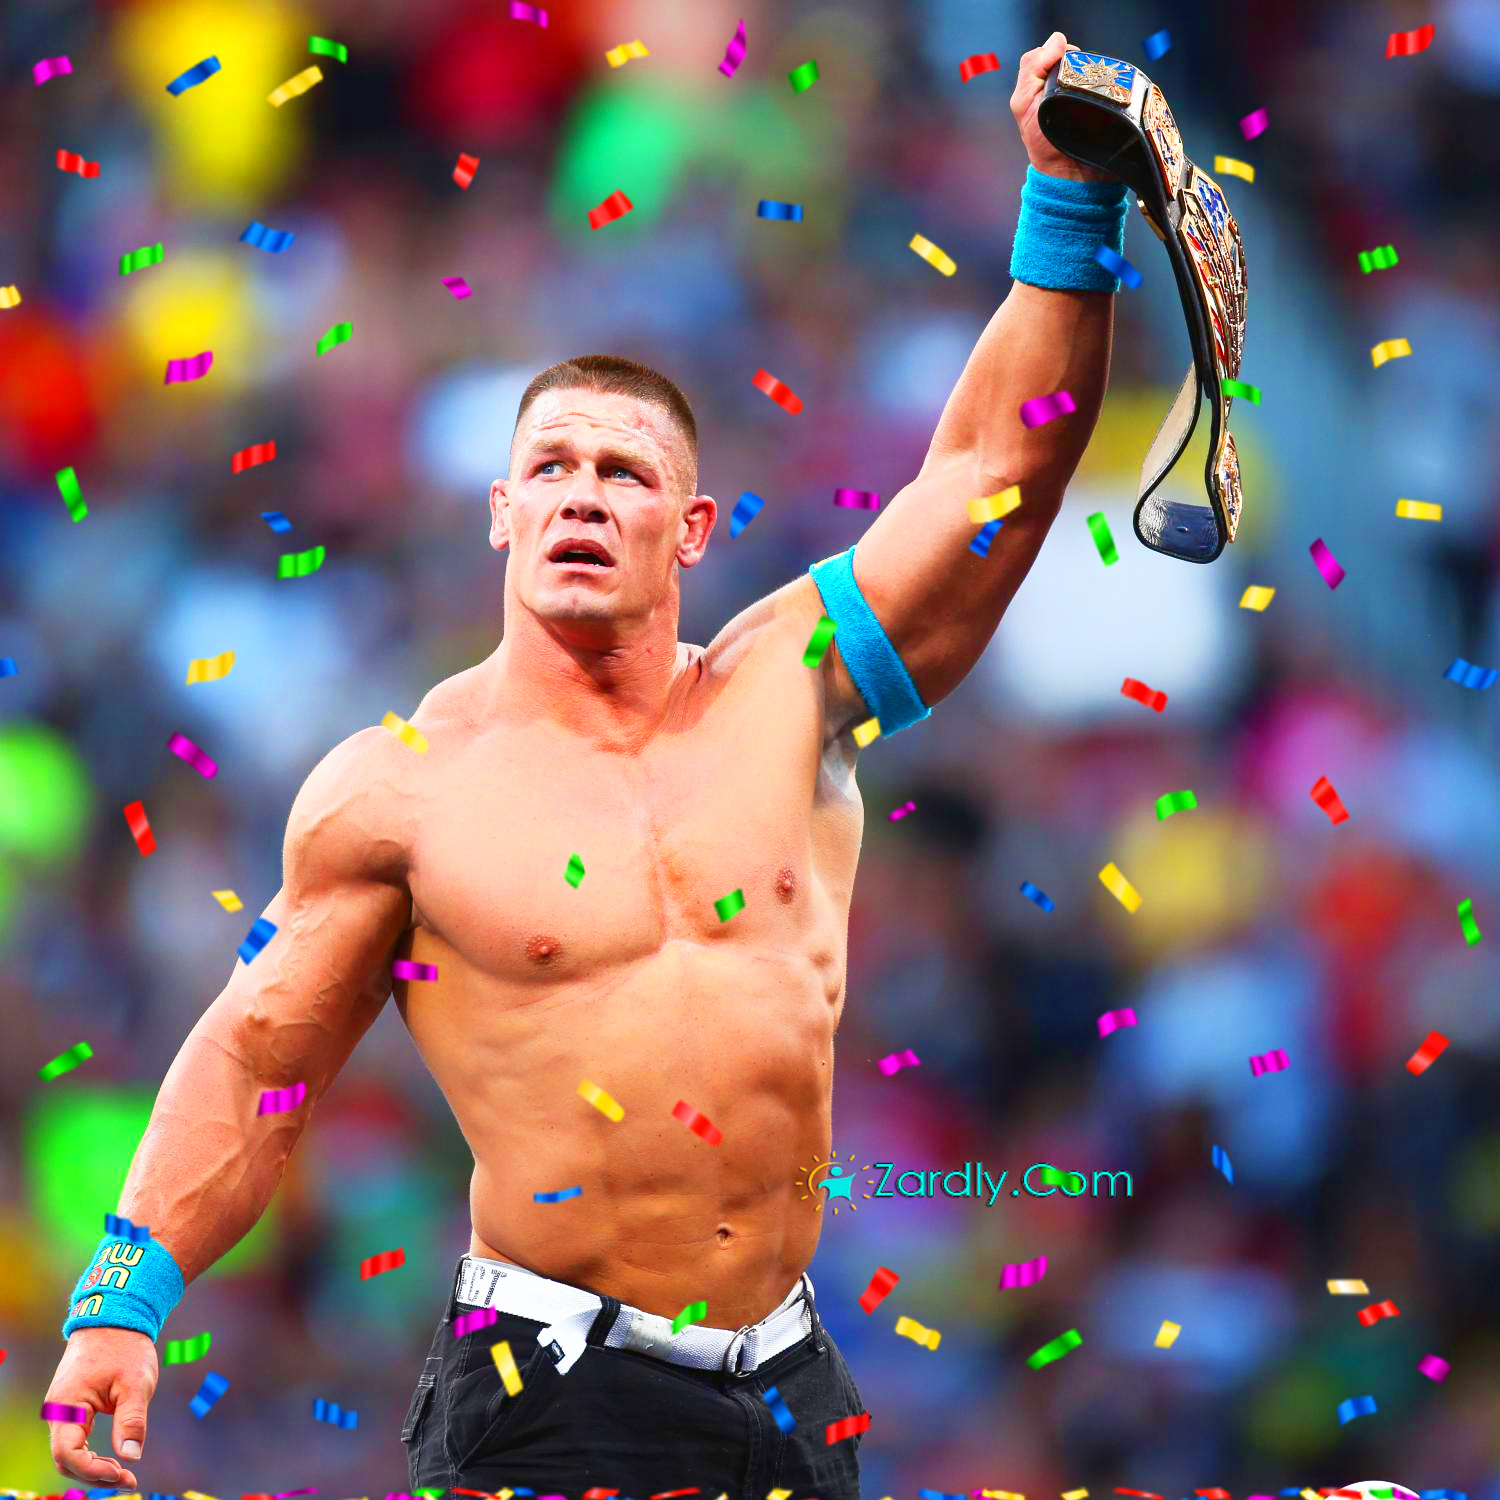 John Cena 2019 Photo, Picture, Image And Wallpaper Gallery